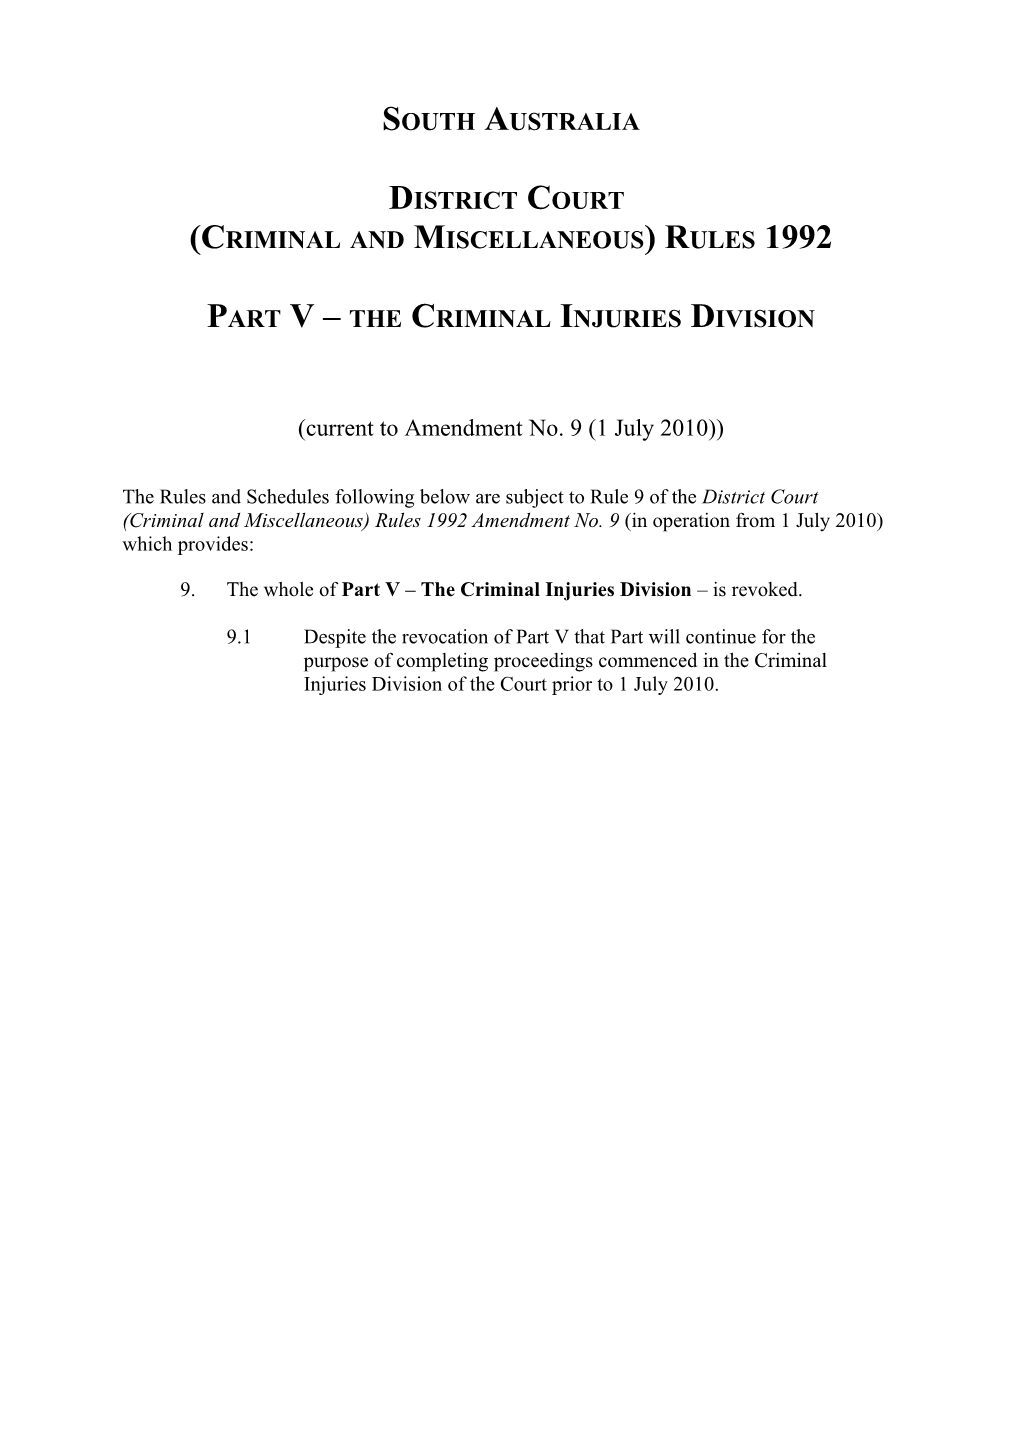 Rules of Court - District Court (Criminal and Miscellaneous) Rules 1992 - Part V (Criminal